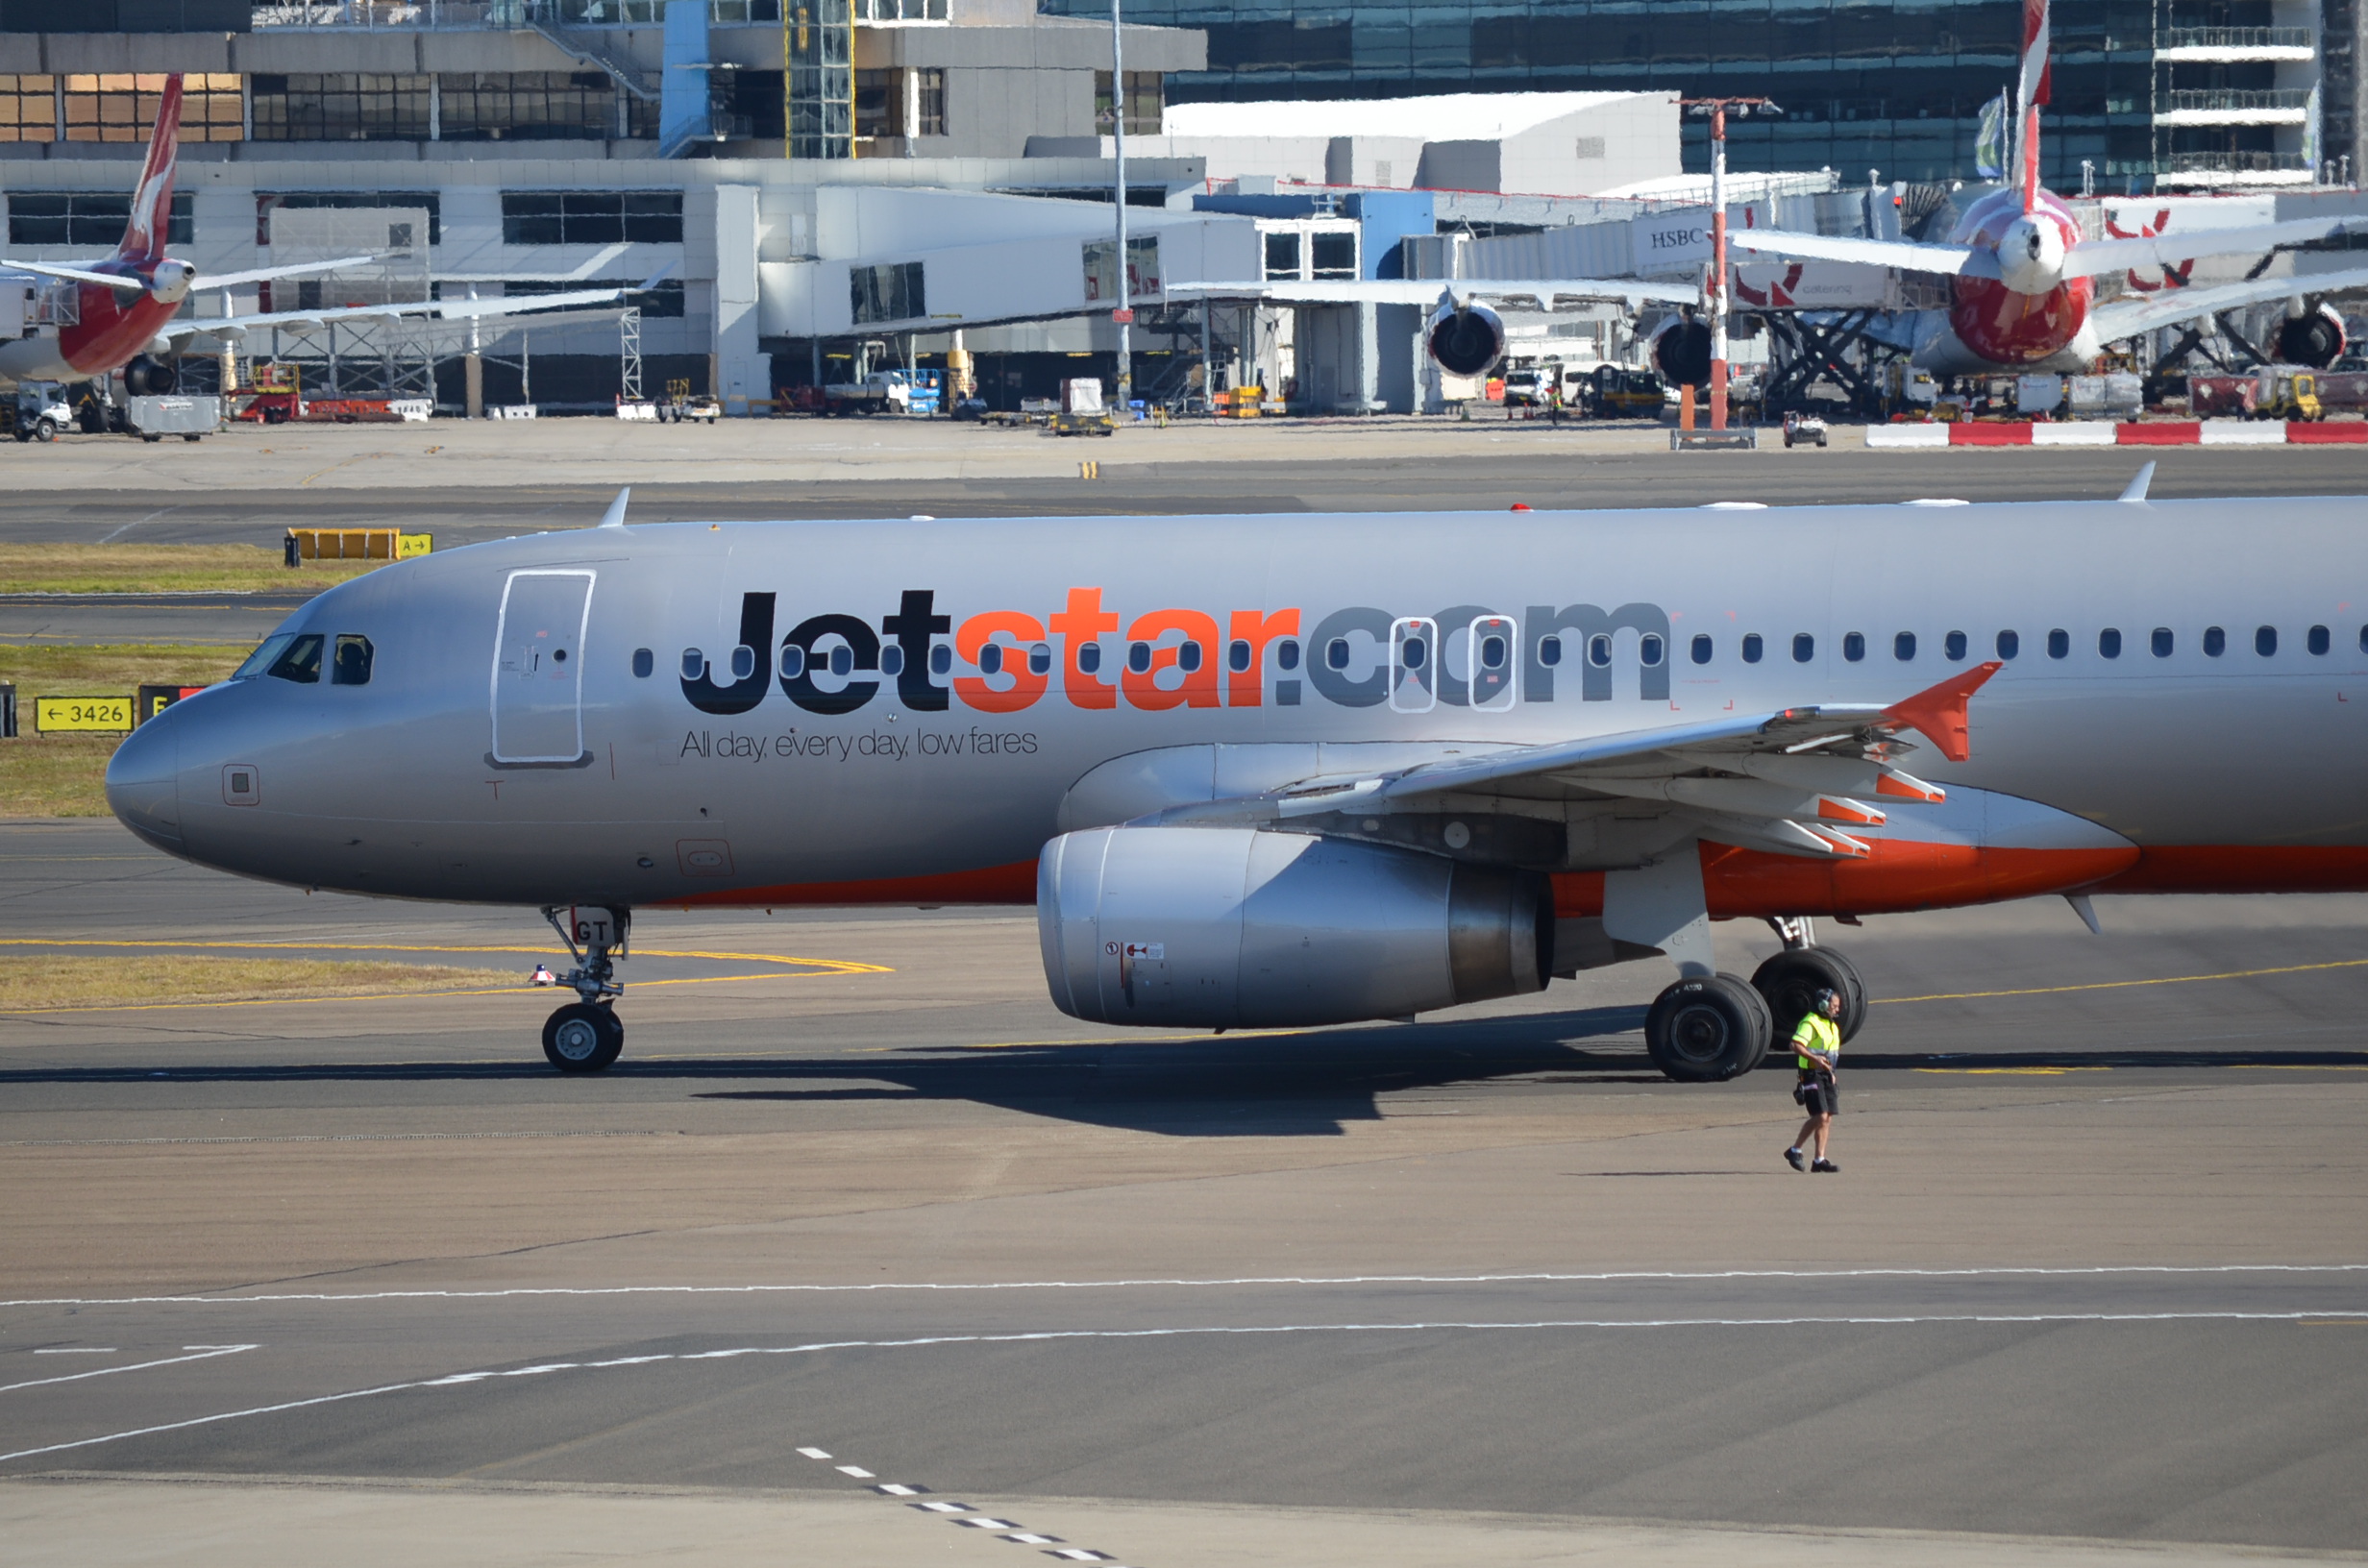 Airbus Airbus A320 Aircraft Airplane Airport Jetstar Sydney 2464x1632